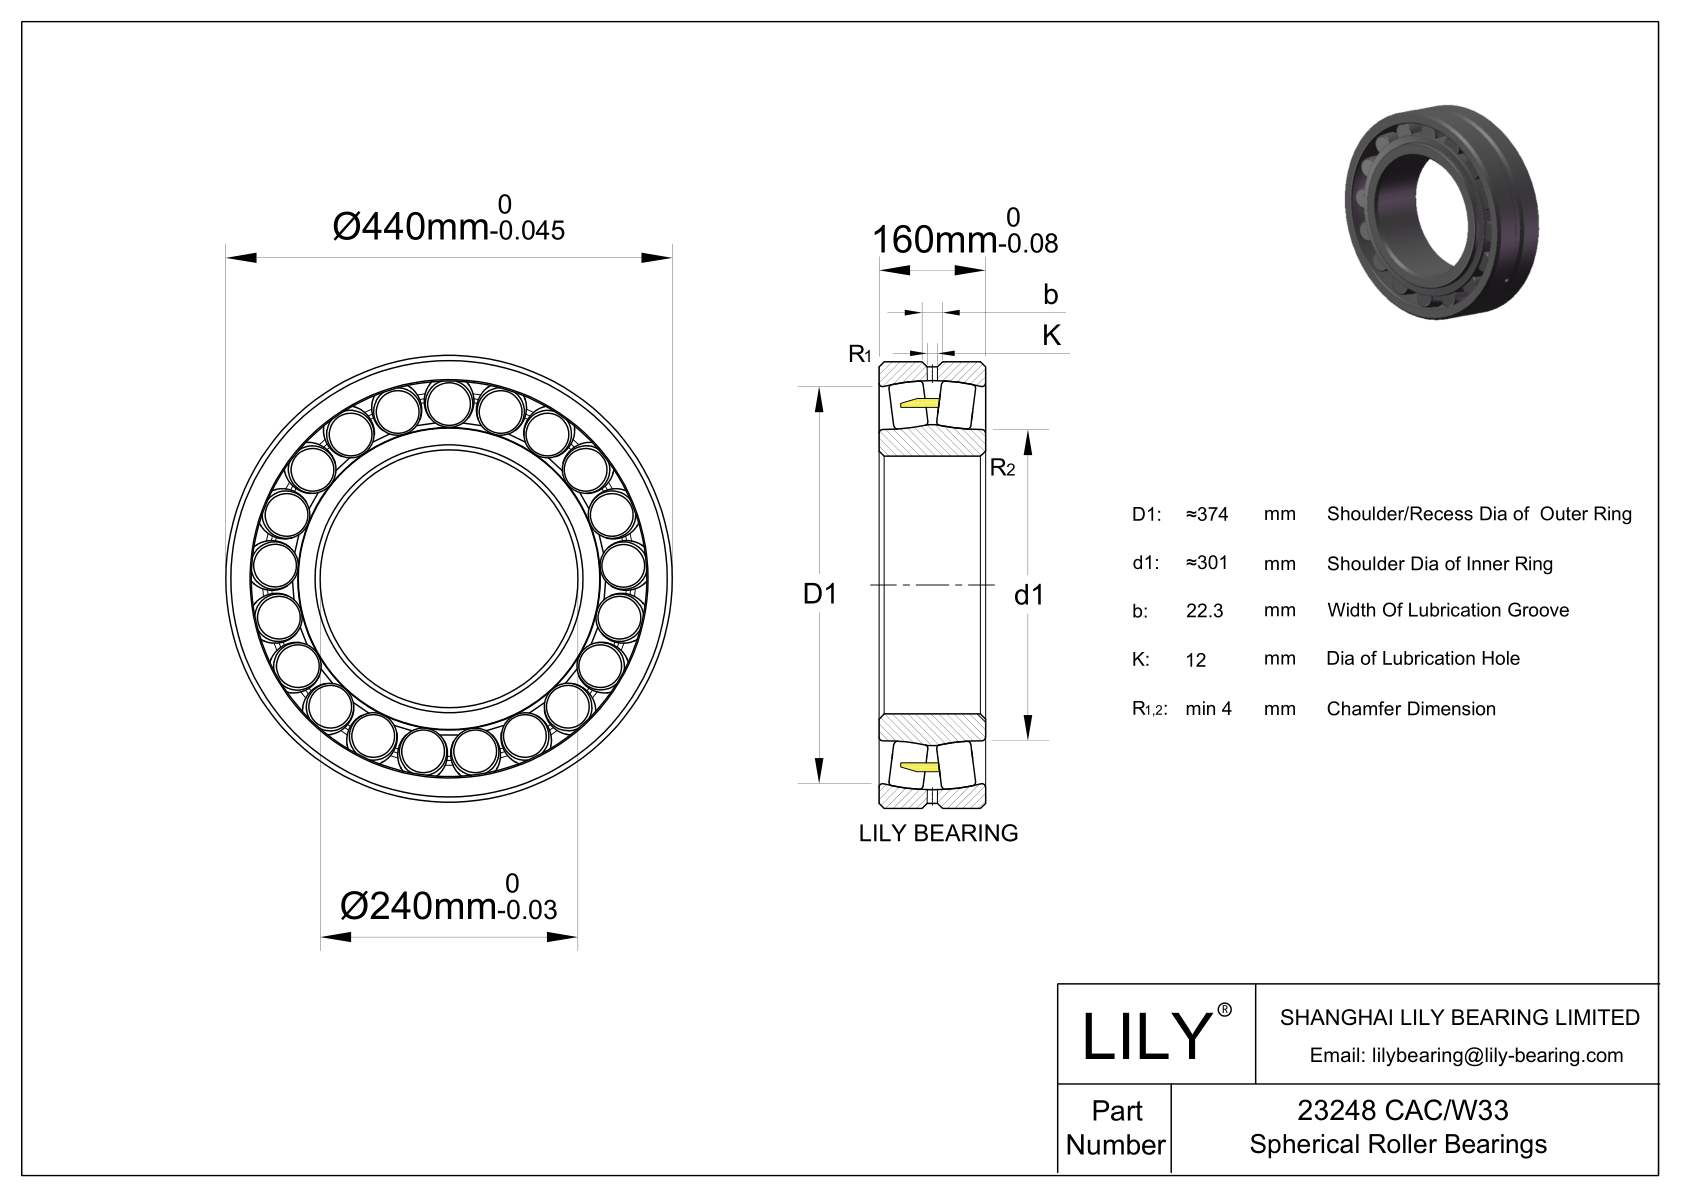 23248 CAC/W33 Double Row Spherical Roller Bearing cad drawing